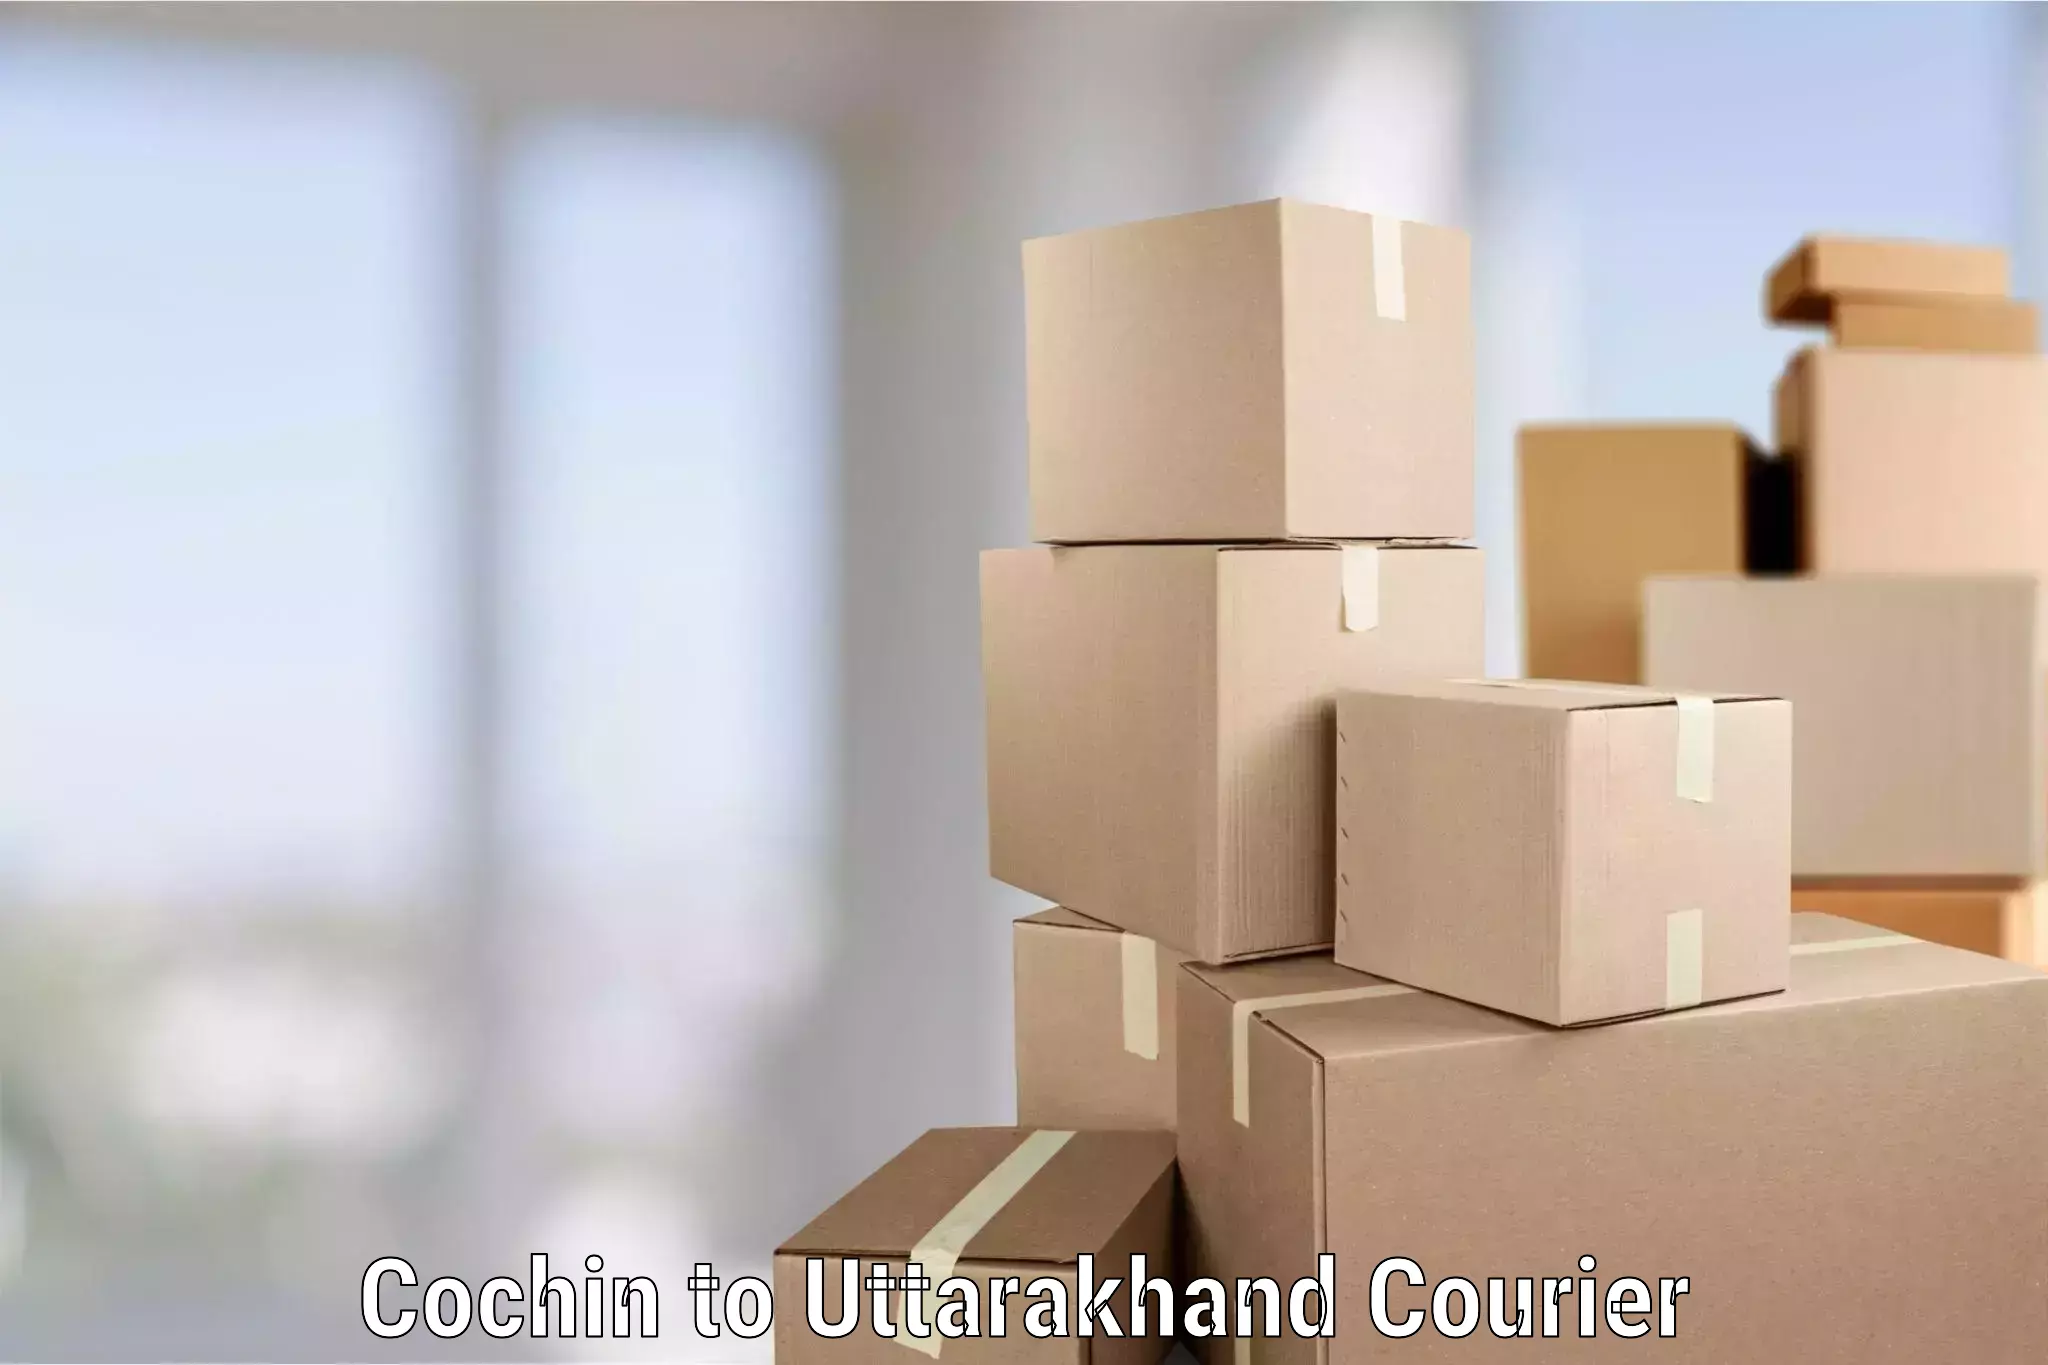 Budget-friendly movers Cochin to Bhagwanpur